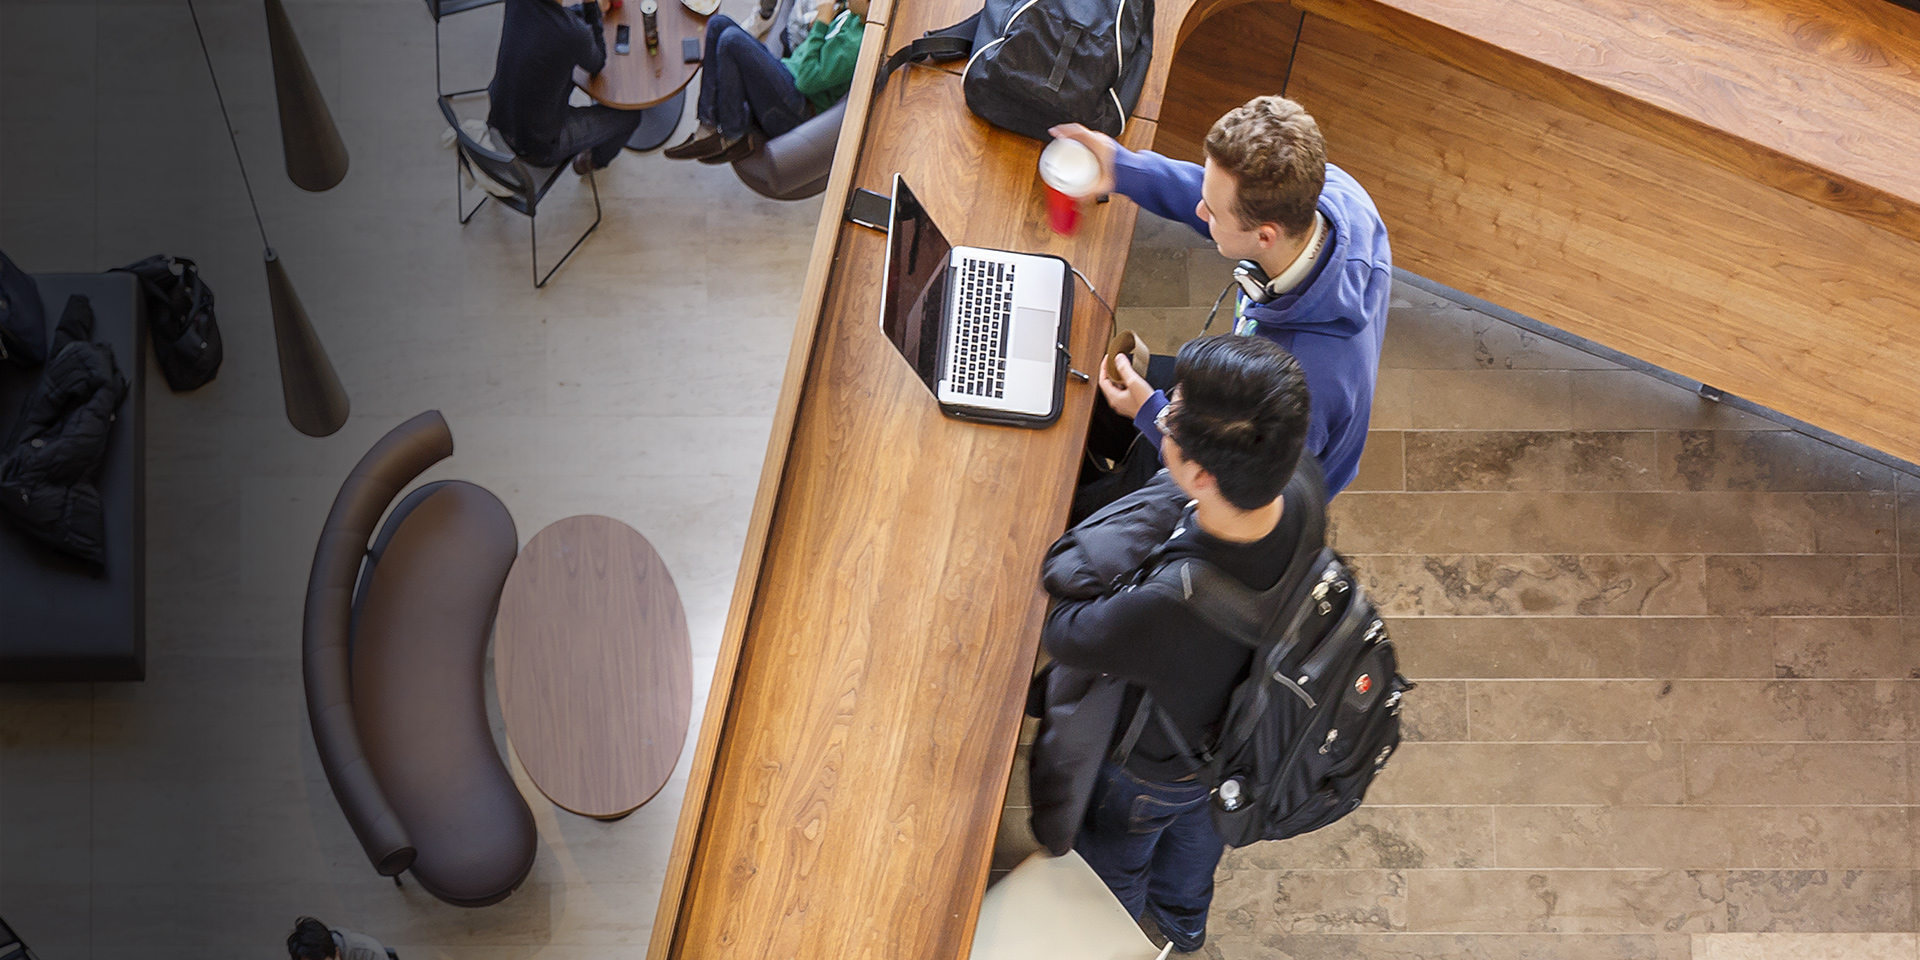 Two students having a discussion while looking at a laptop at the Ivey Business School